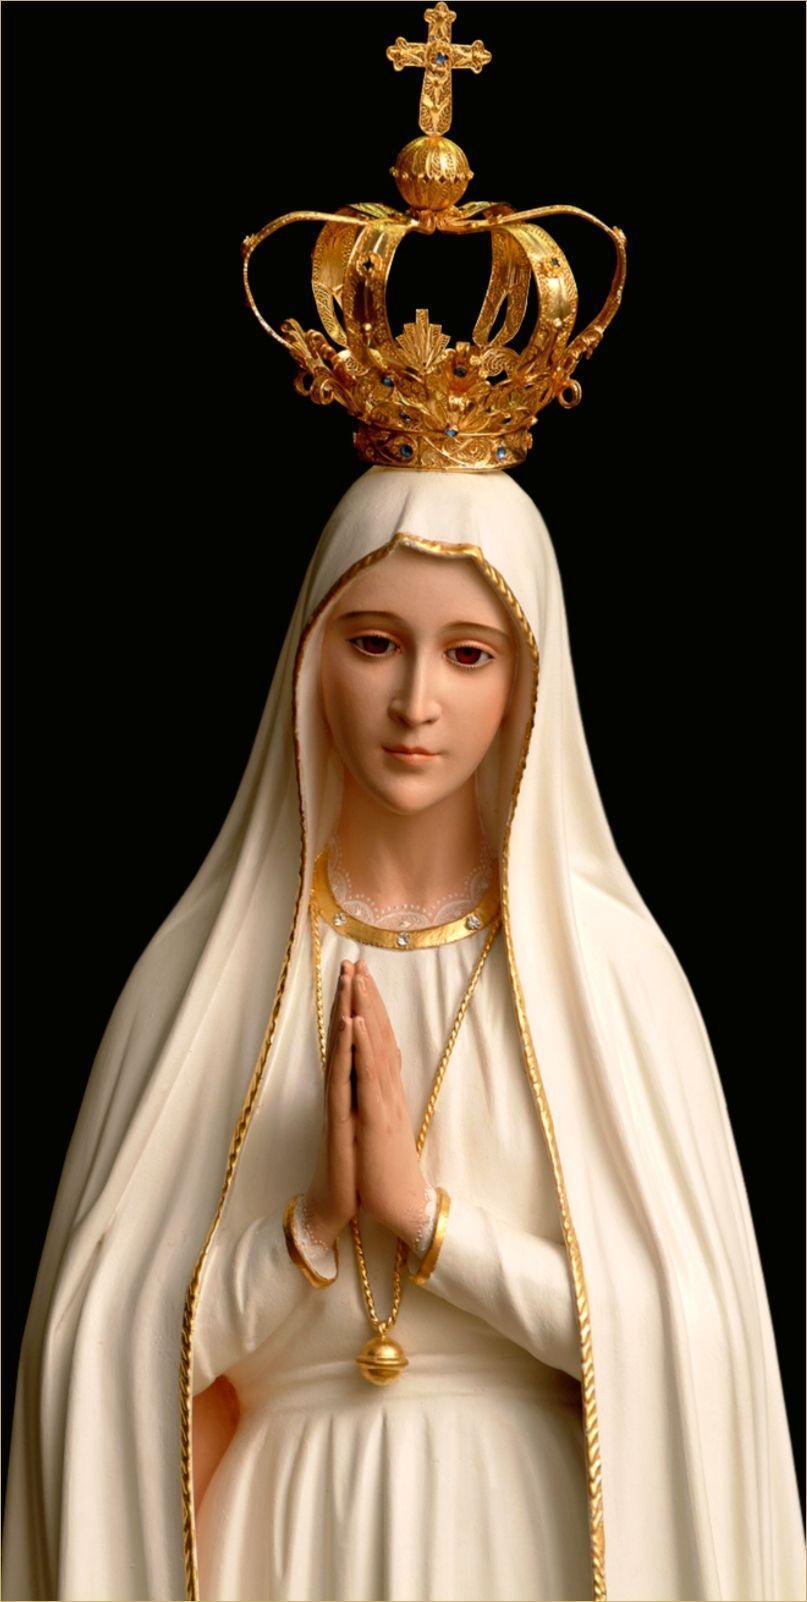 Our Lady Of Fatima Statue Wallpaper